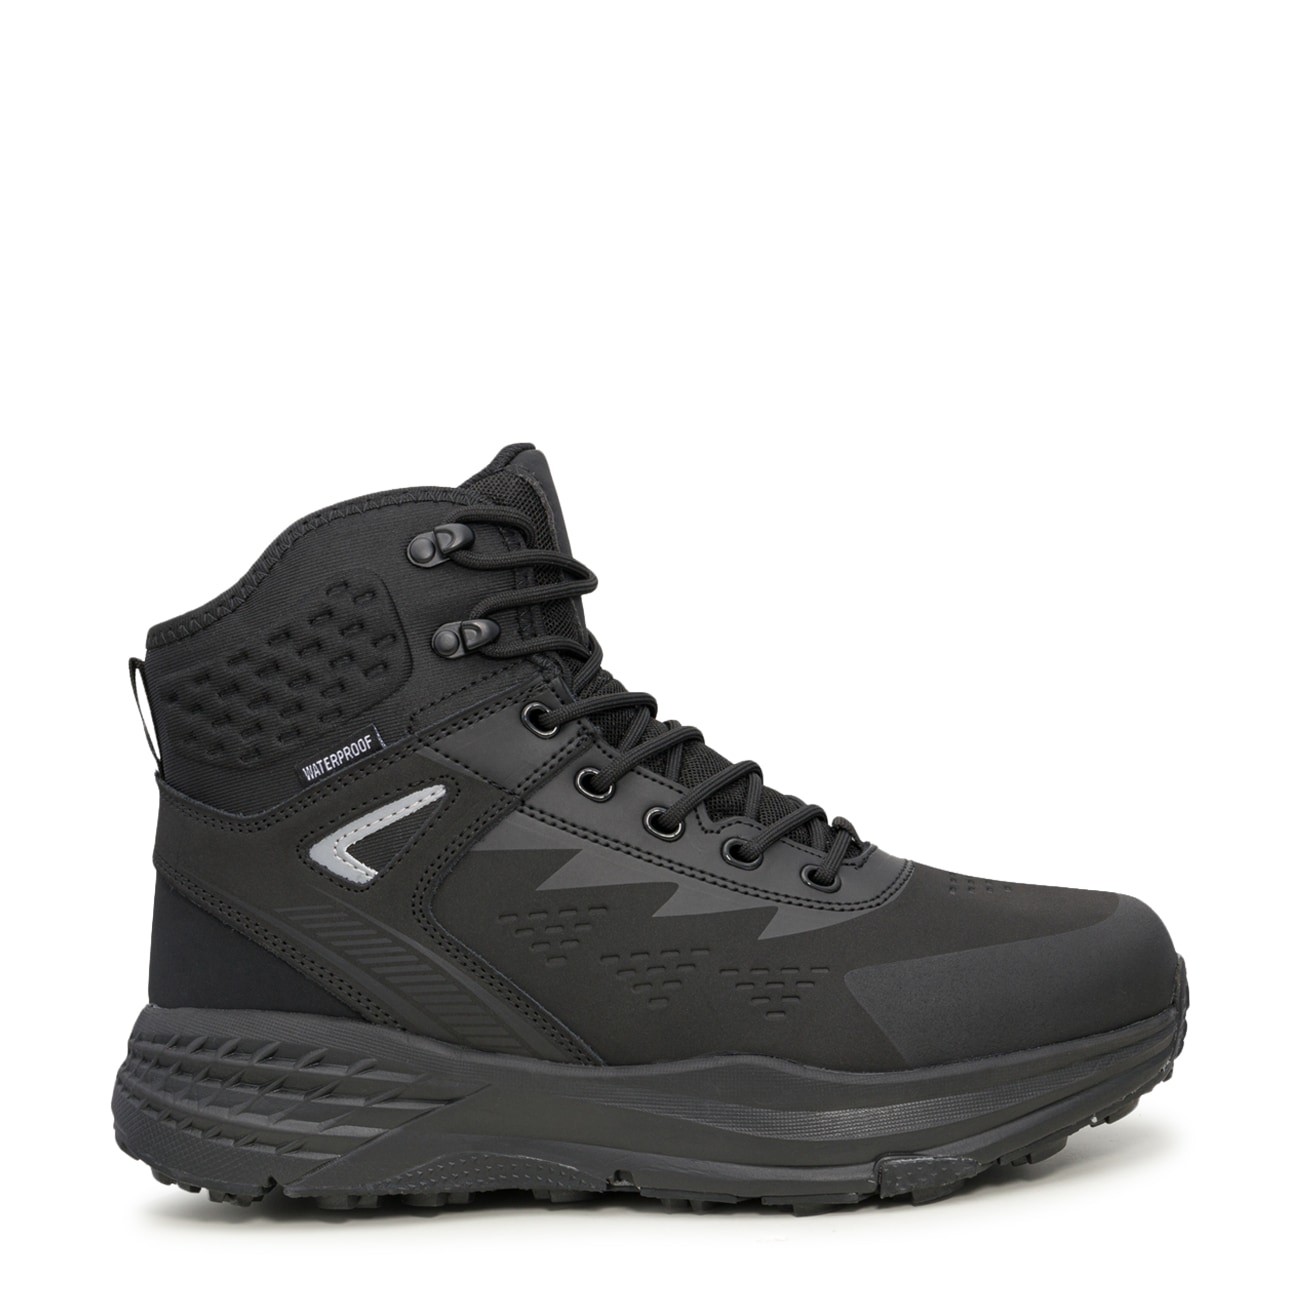 Elements Men's Hike Winter Boot | The Shoe Company